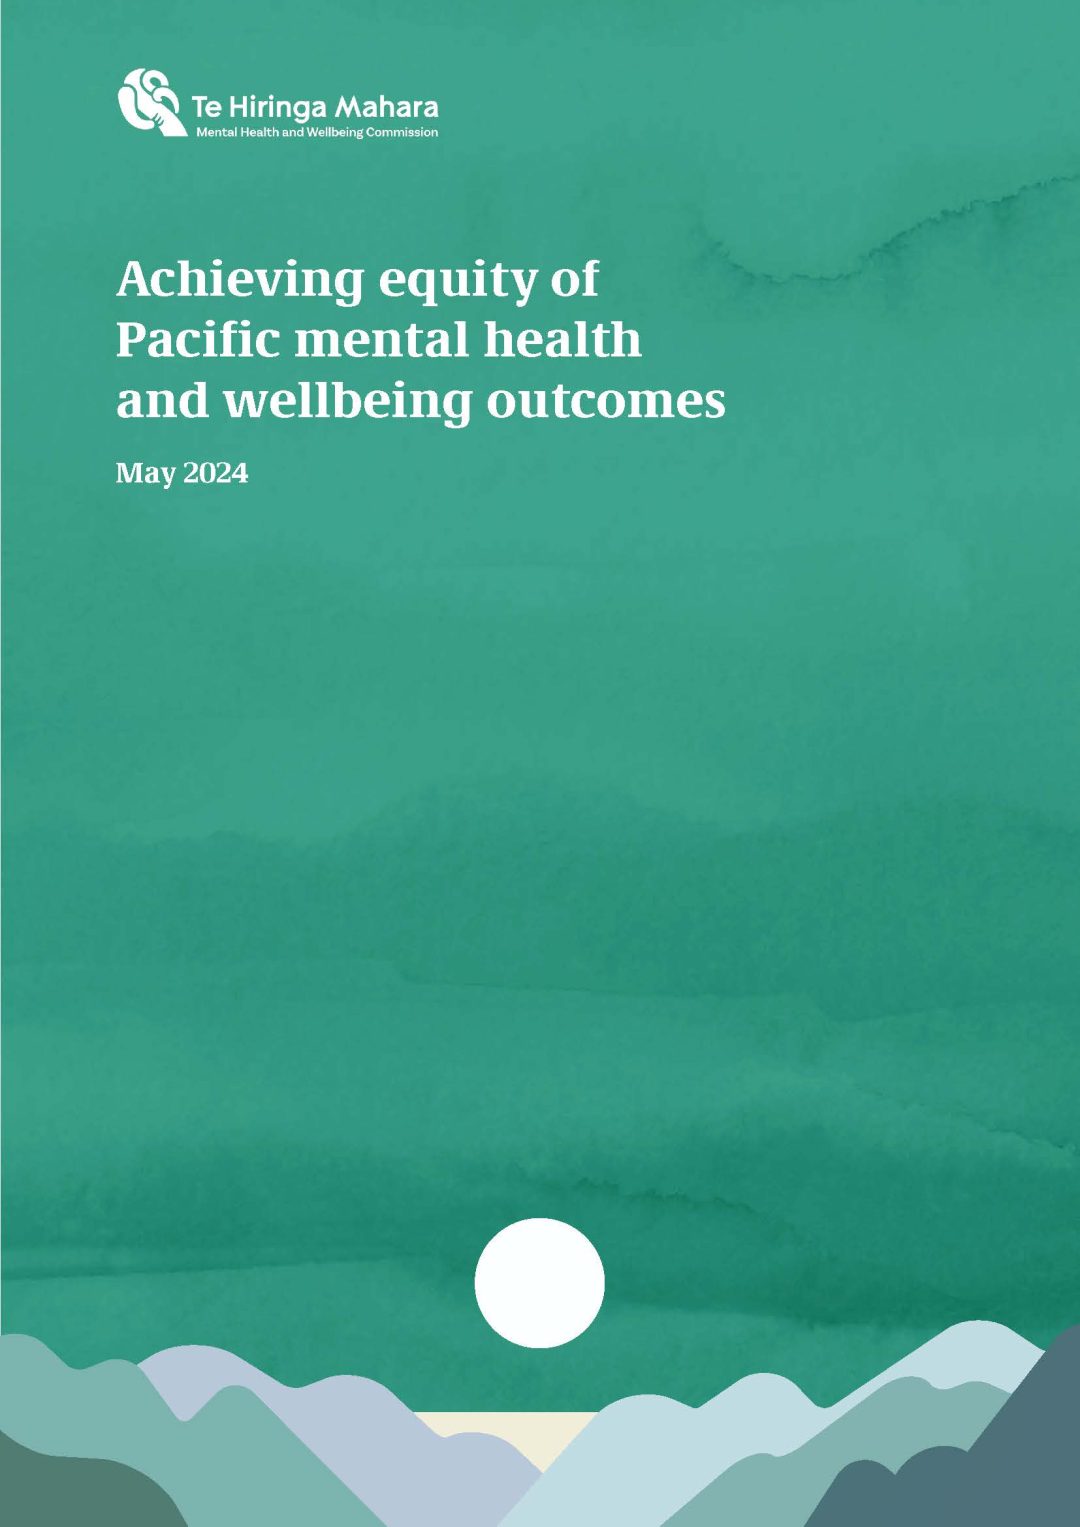 Achieving equity of Pacific mental health and wellbeing outcomes